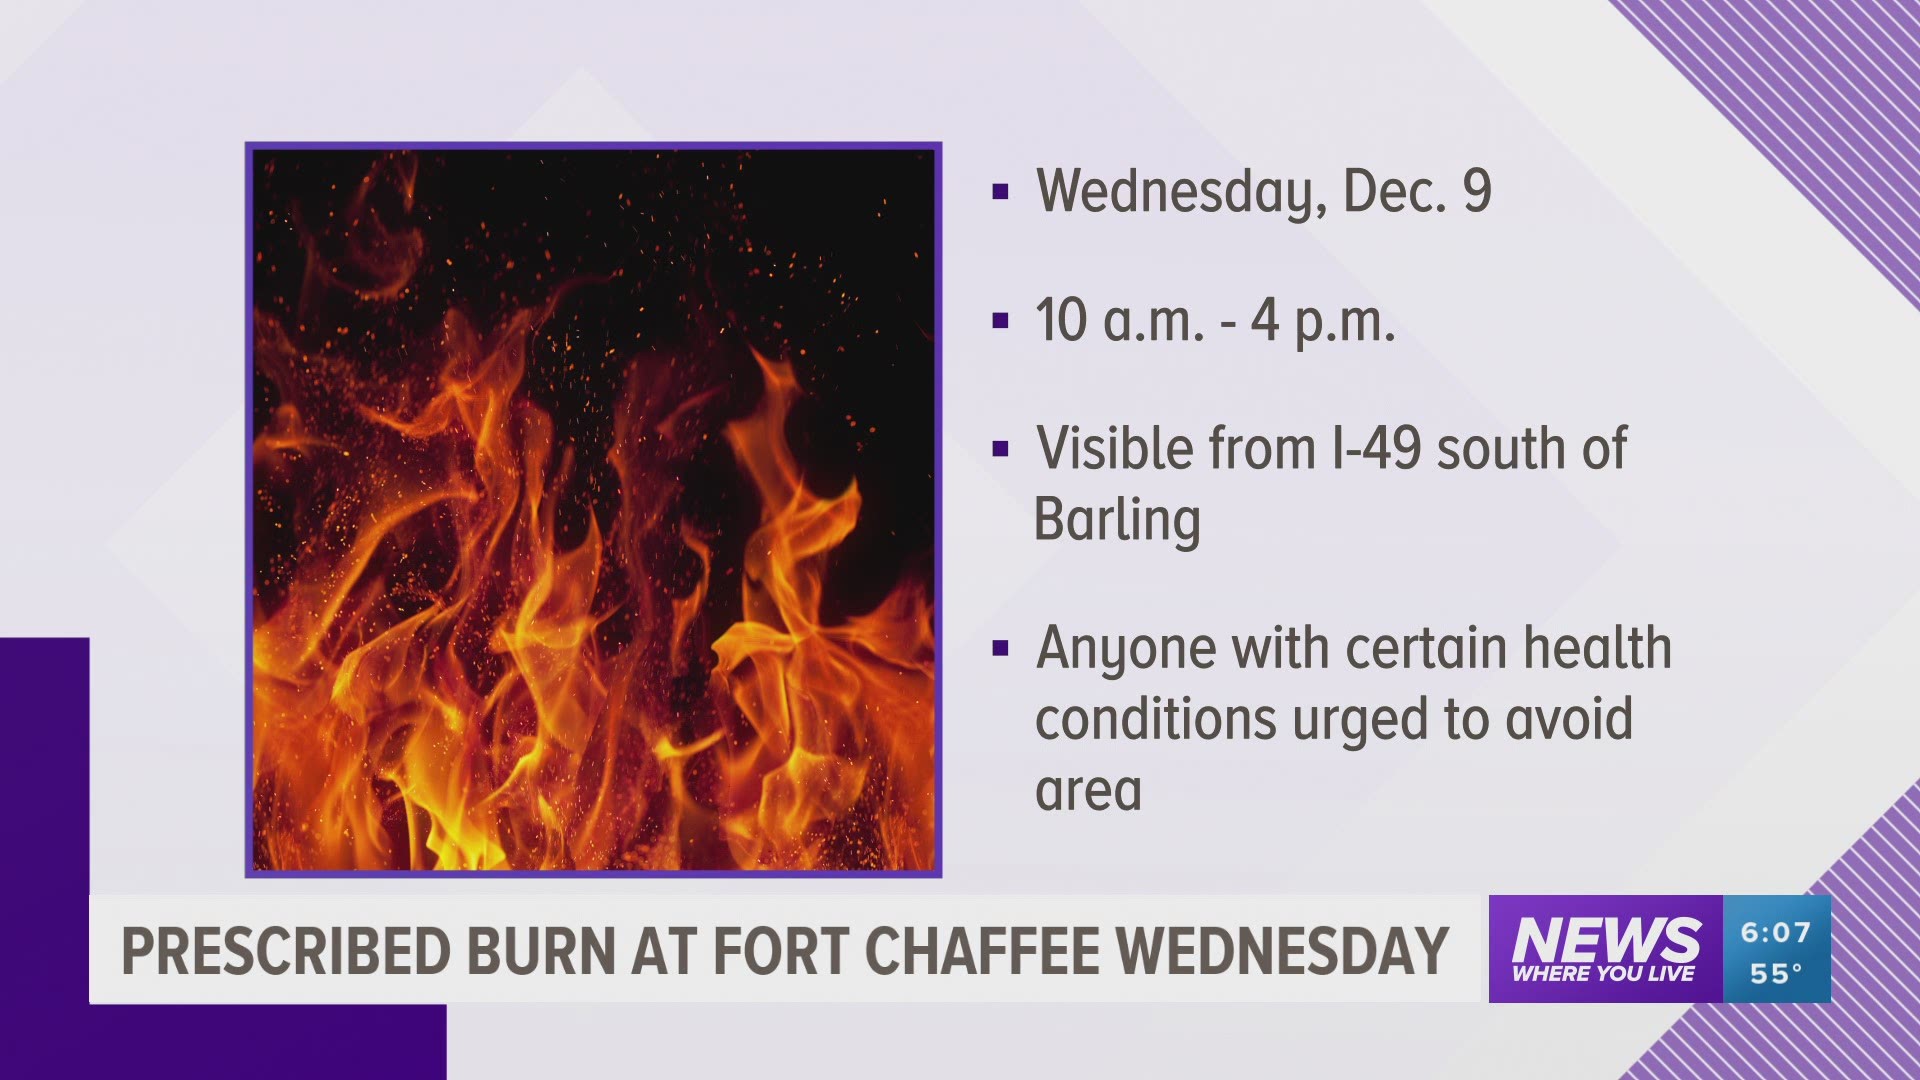 On Dec. 9, the burn will take place at a training range on the west boundary of Fort Chaffee Joint Maneuver Training Center, potentially affecting Chaffee Crossing.